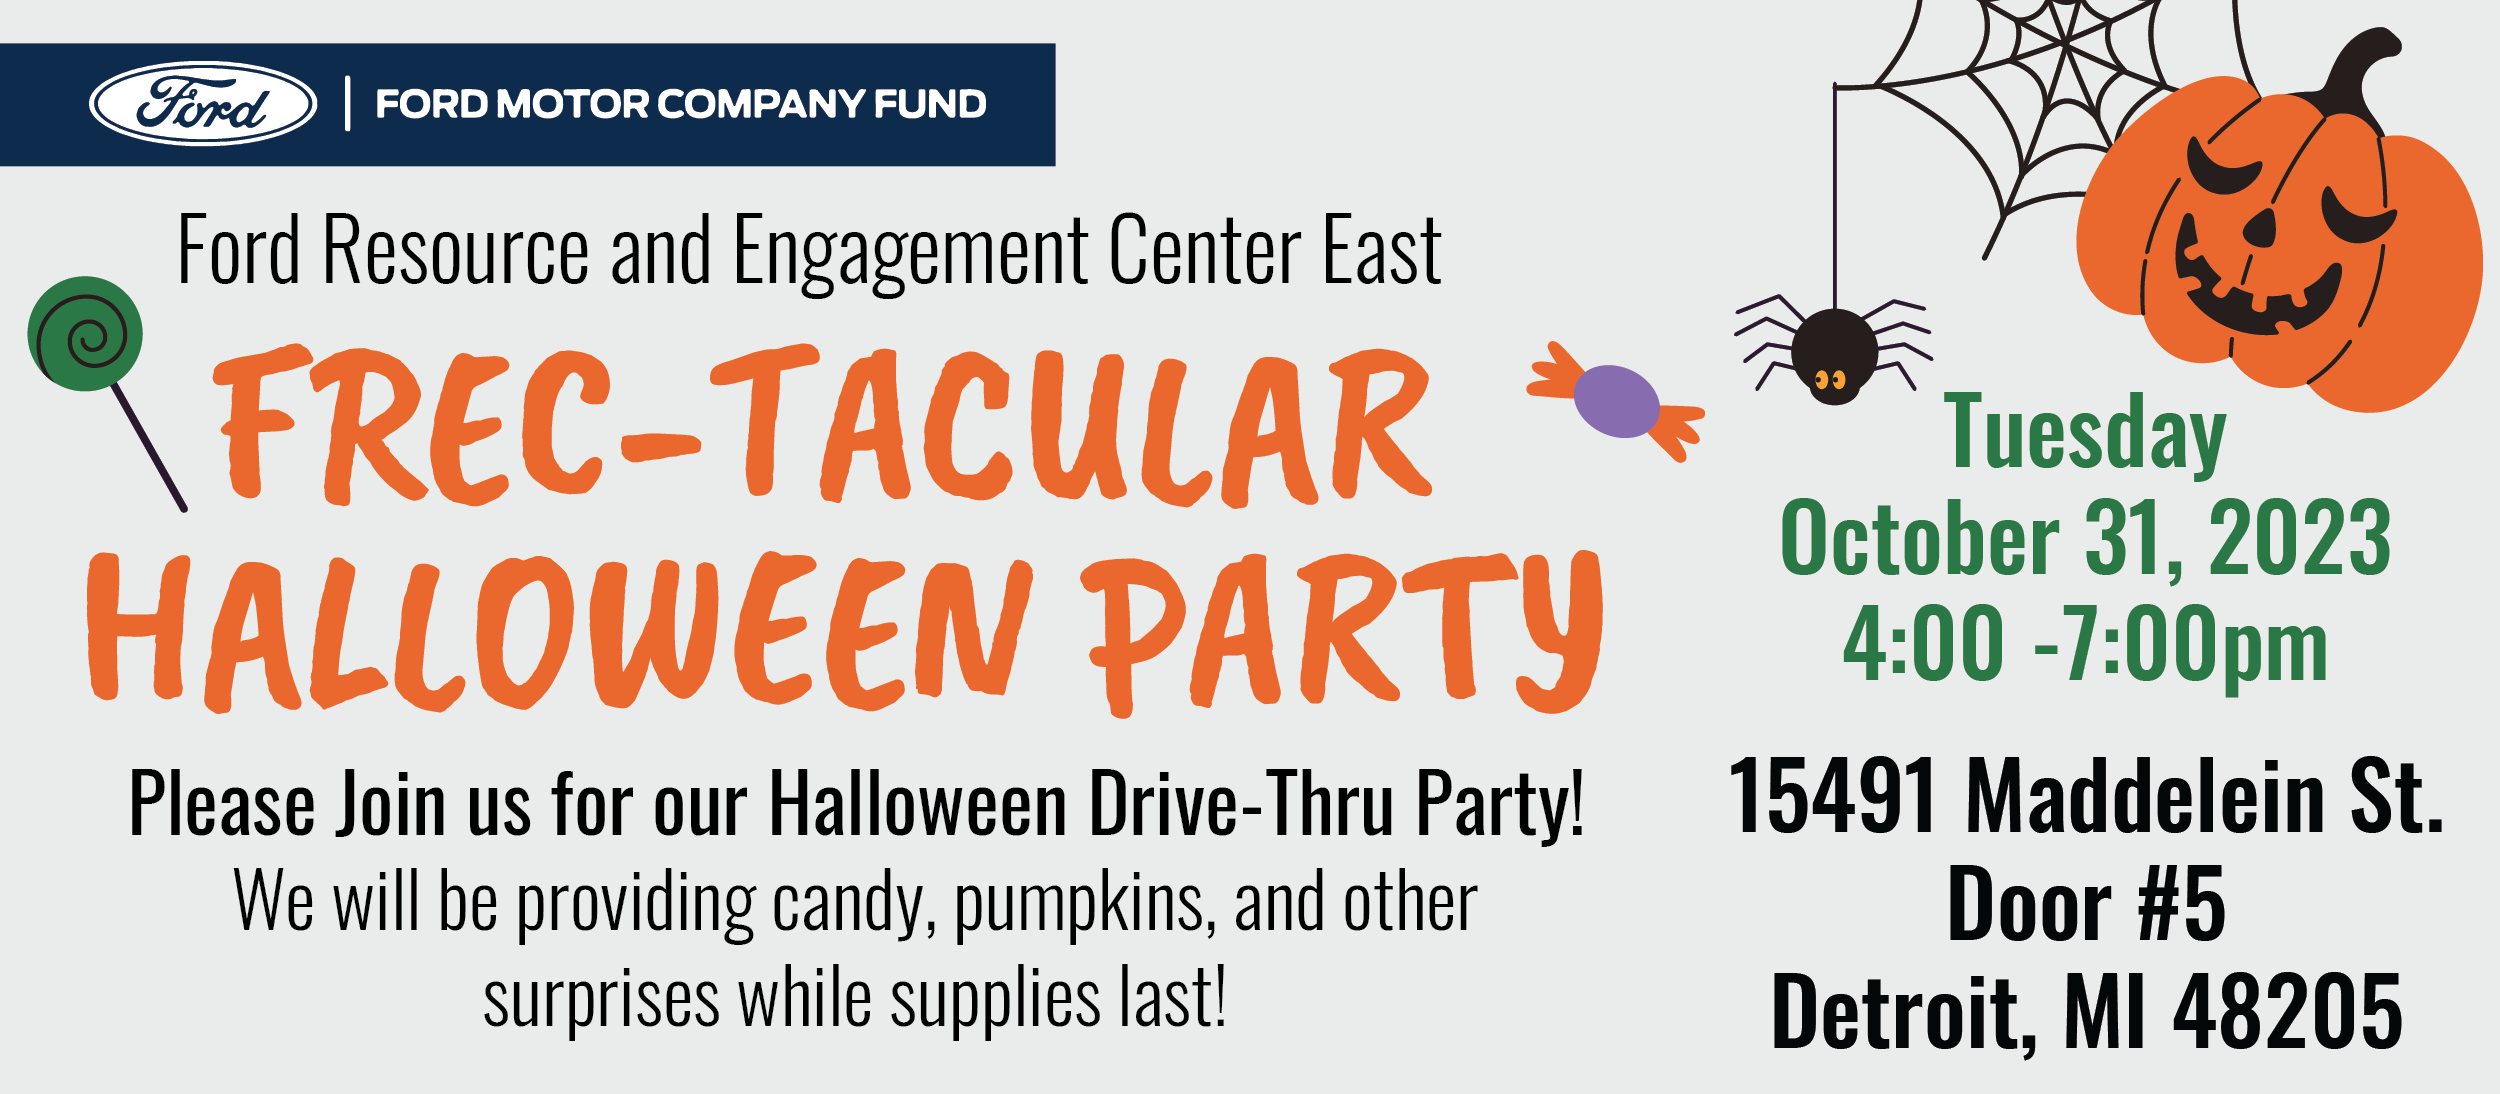 Ford Resource and Engagement Center East Presents: FREC-tacular Halloween Drive-Thru Party!